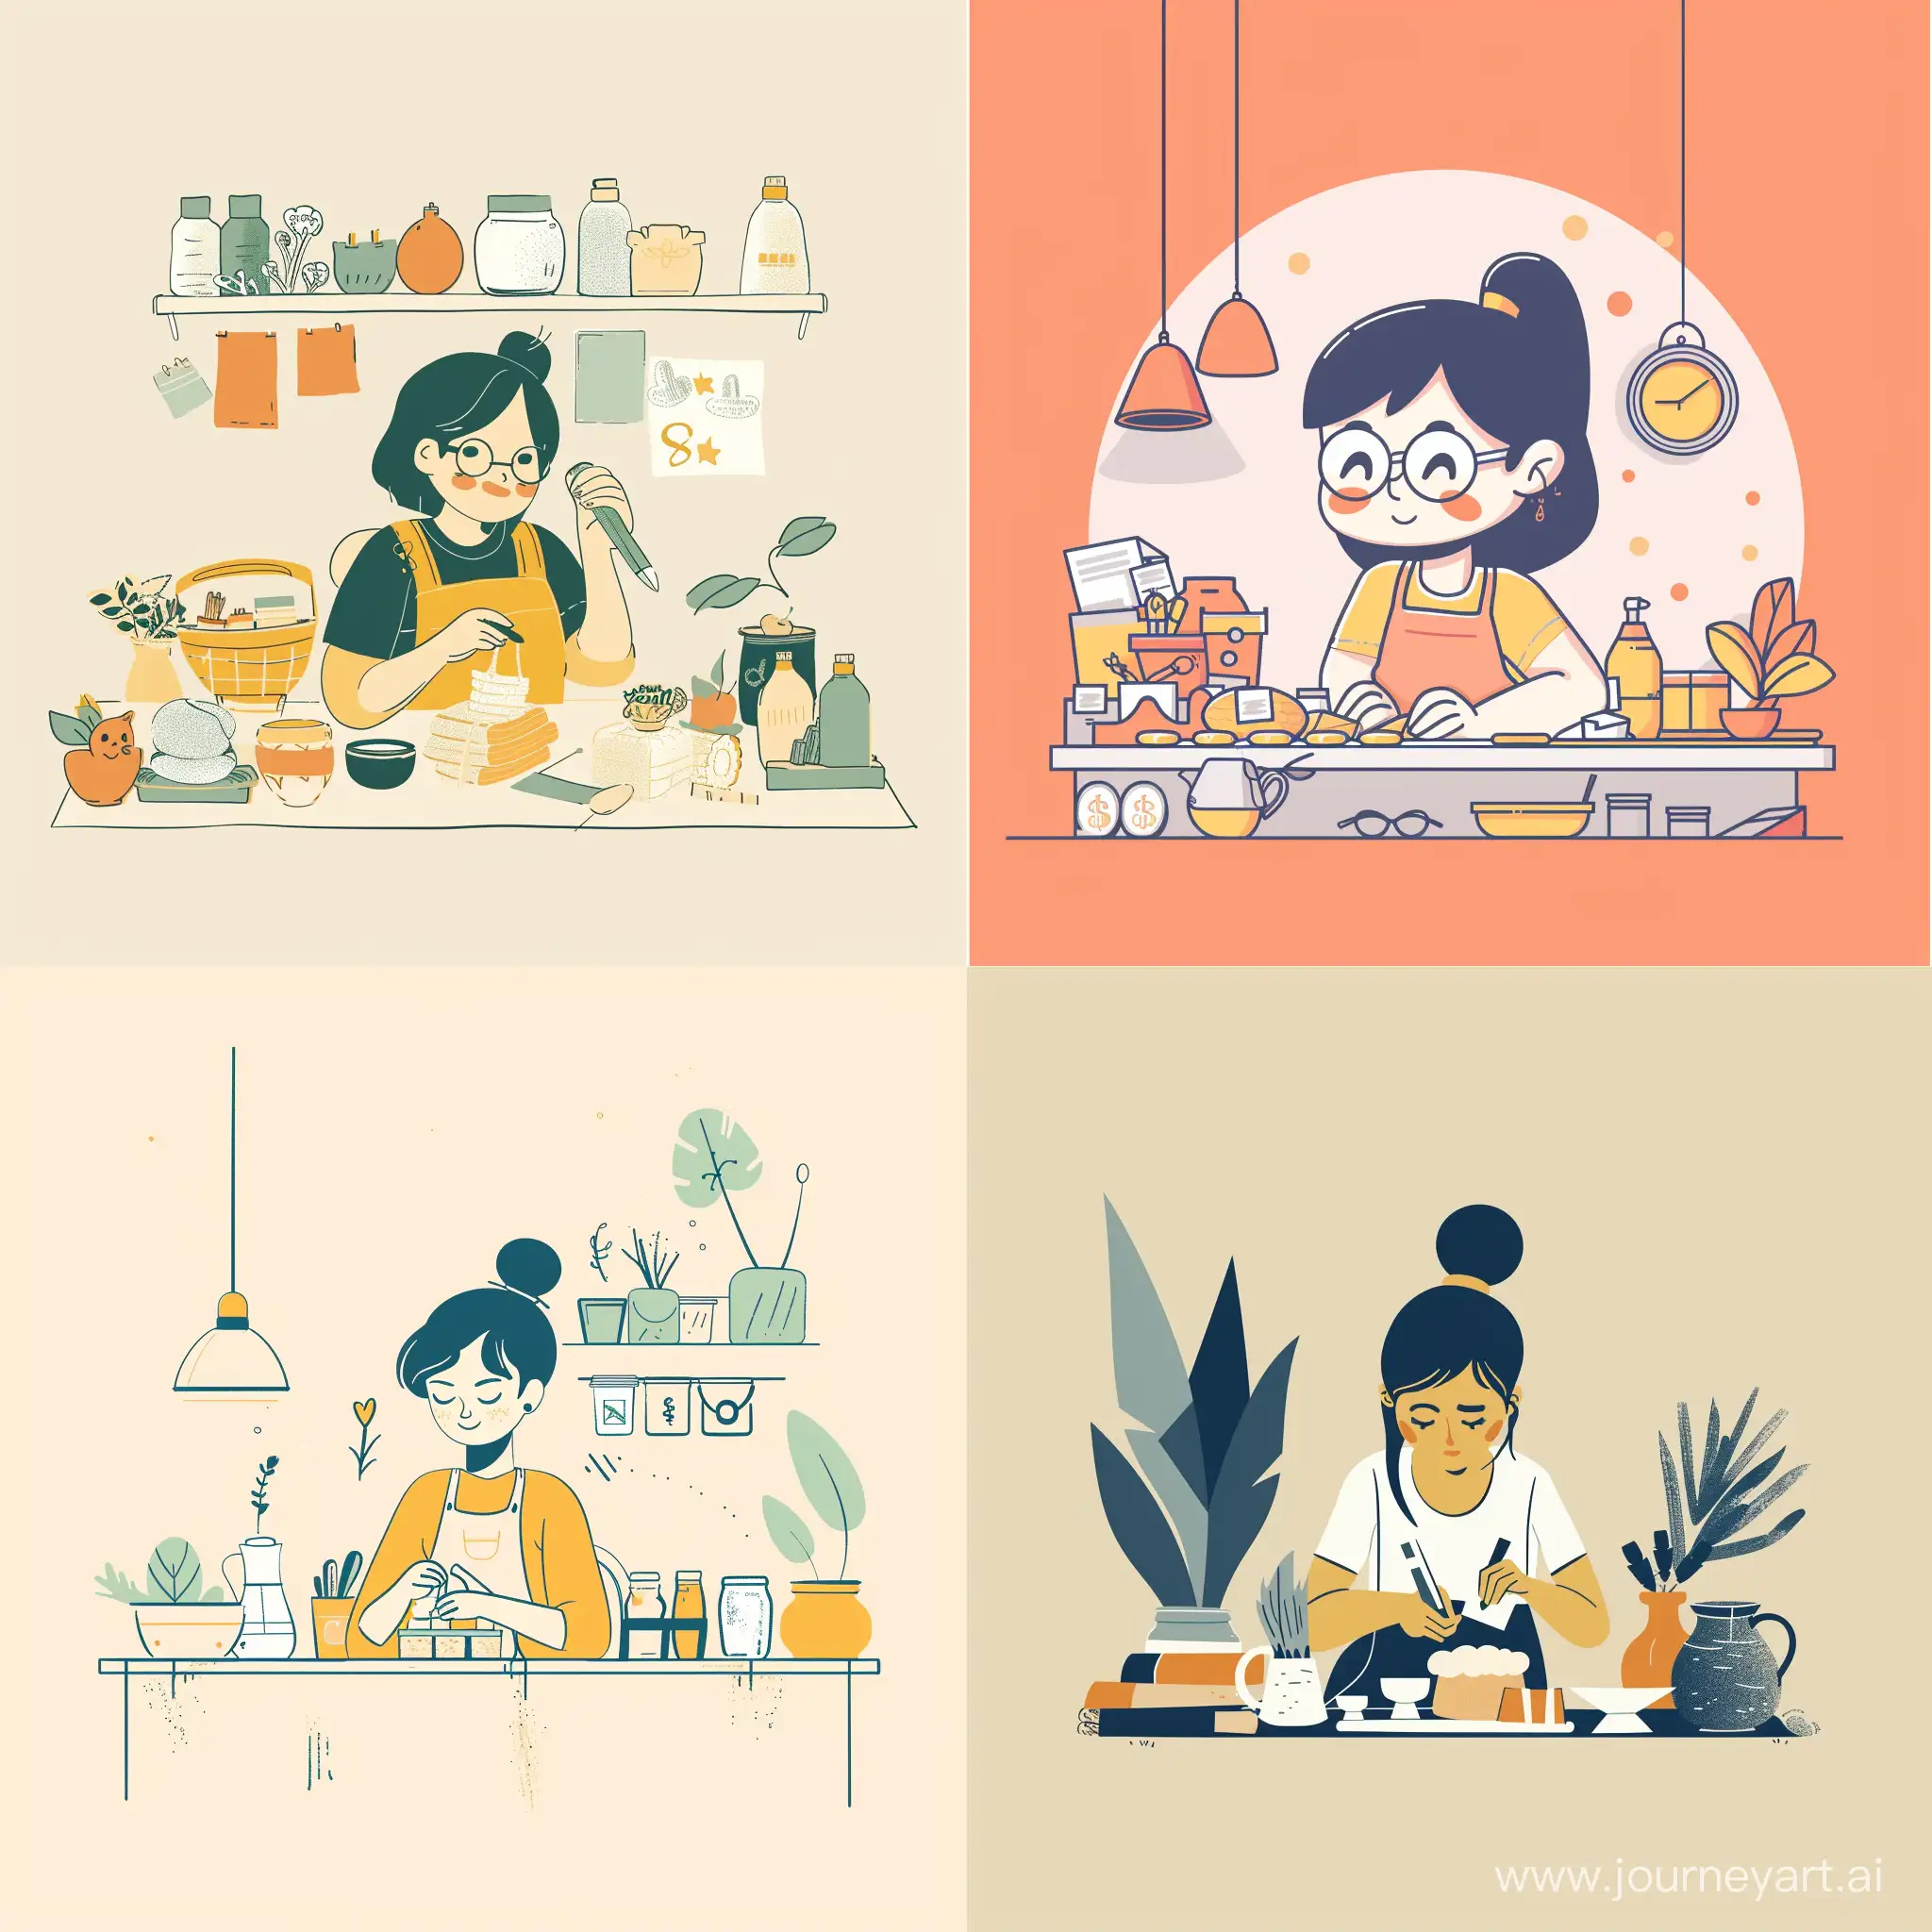 illustration a minimal graphic image "Show a student who makes handmade goods and earns money from it." with plain color background



